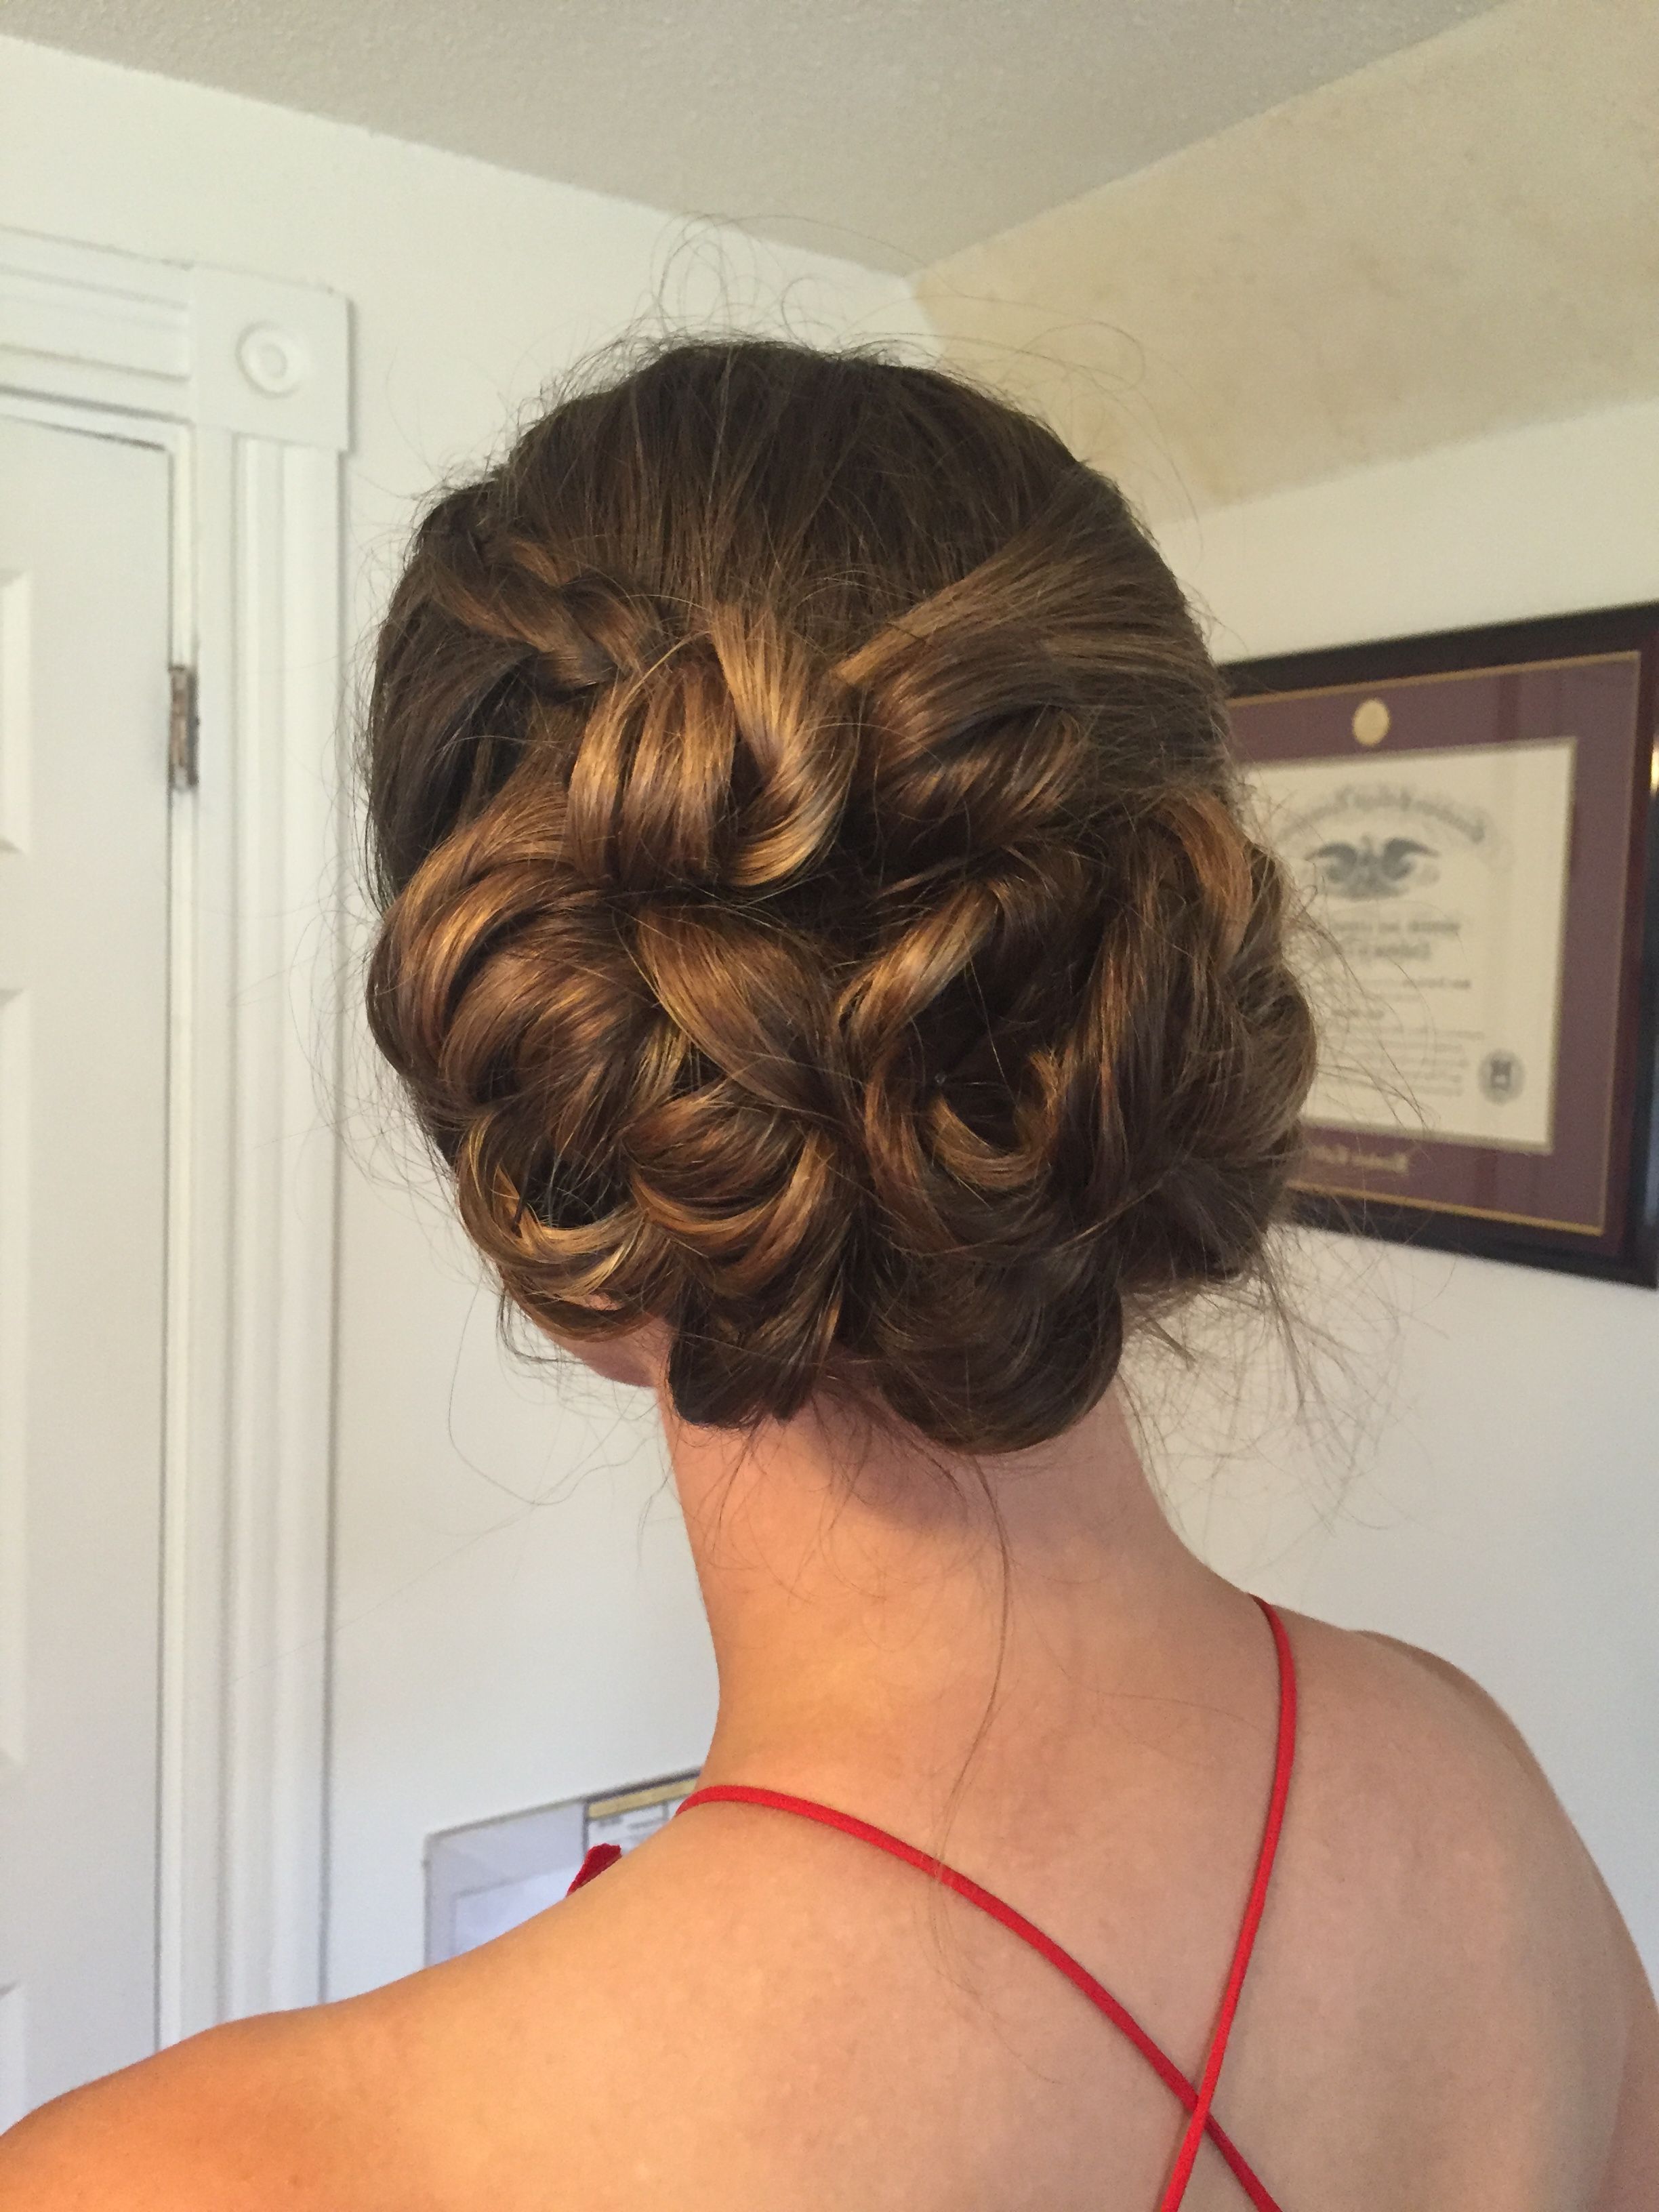 Latest Braided Chignon Hairstyles Pertaining To Hairstyles : Chic Braided Chignon Fab Low Side Bun Updo For (View 8 of 20)